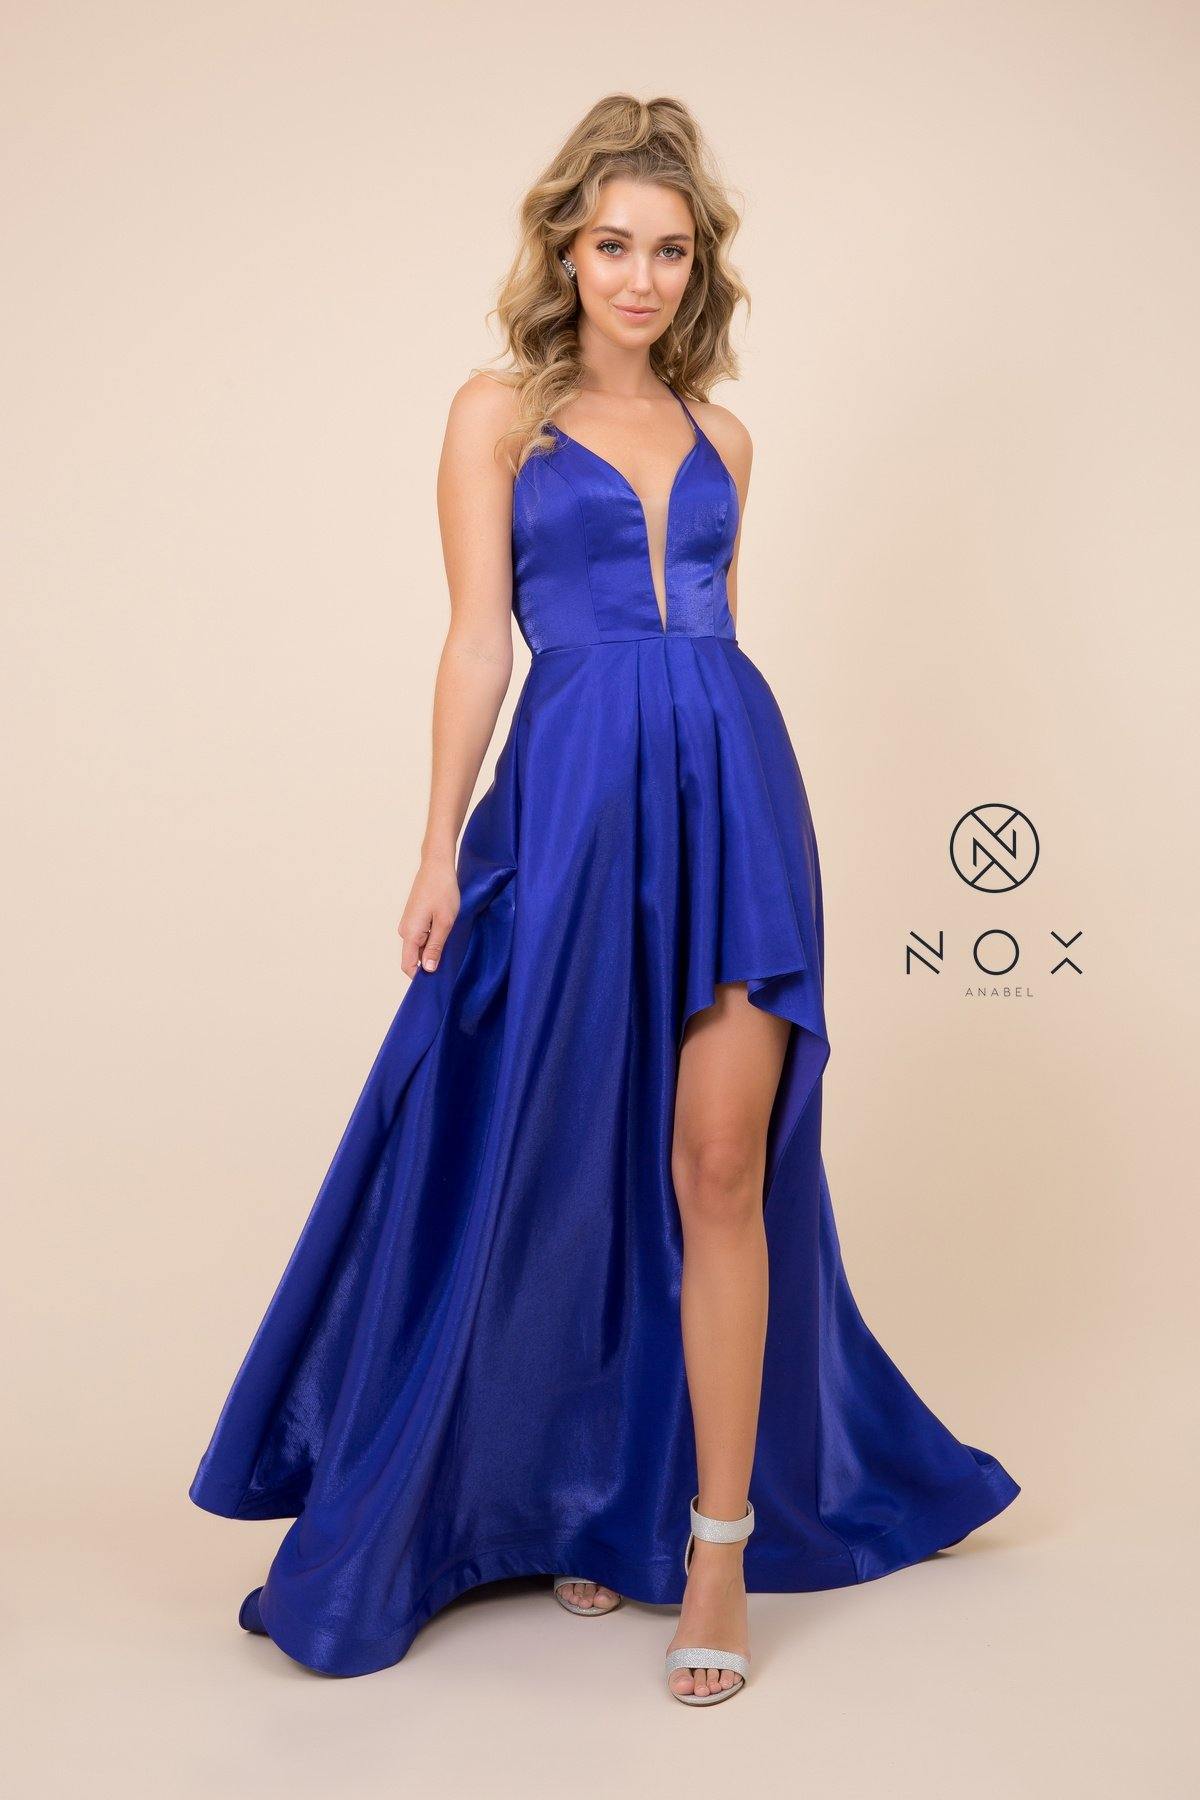 Long Sexy Prom Dress Evening Gown - The Dress Outlet Nox Anabel